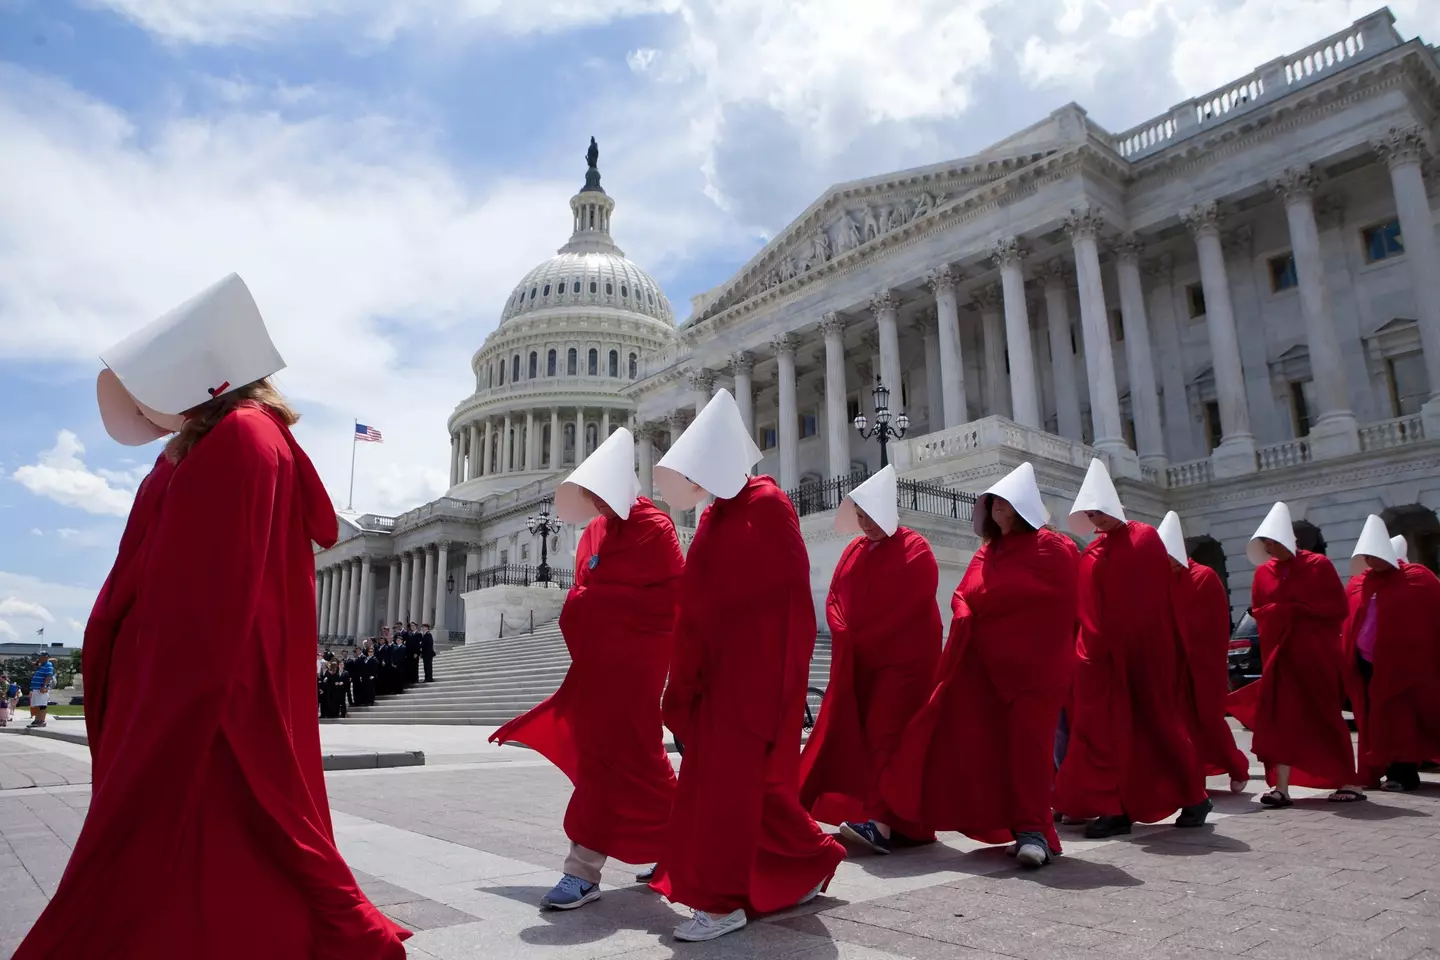 Many feel the current attack on US women's rights is reminiscent of The Handmaid's Tale.